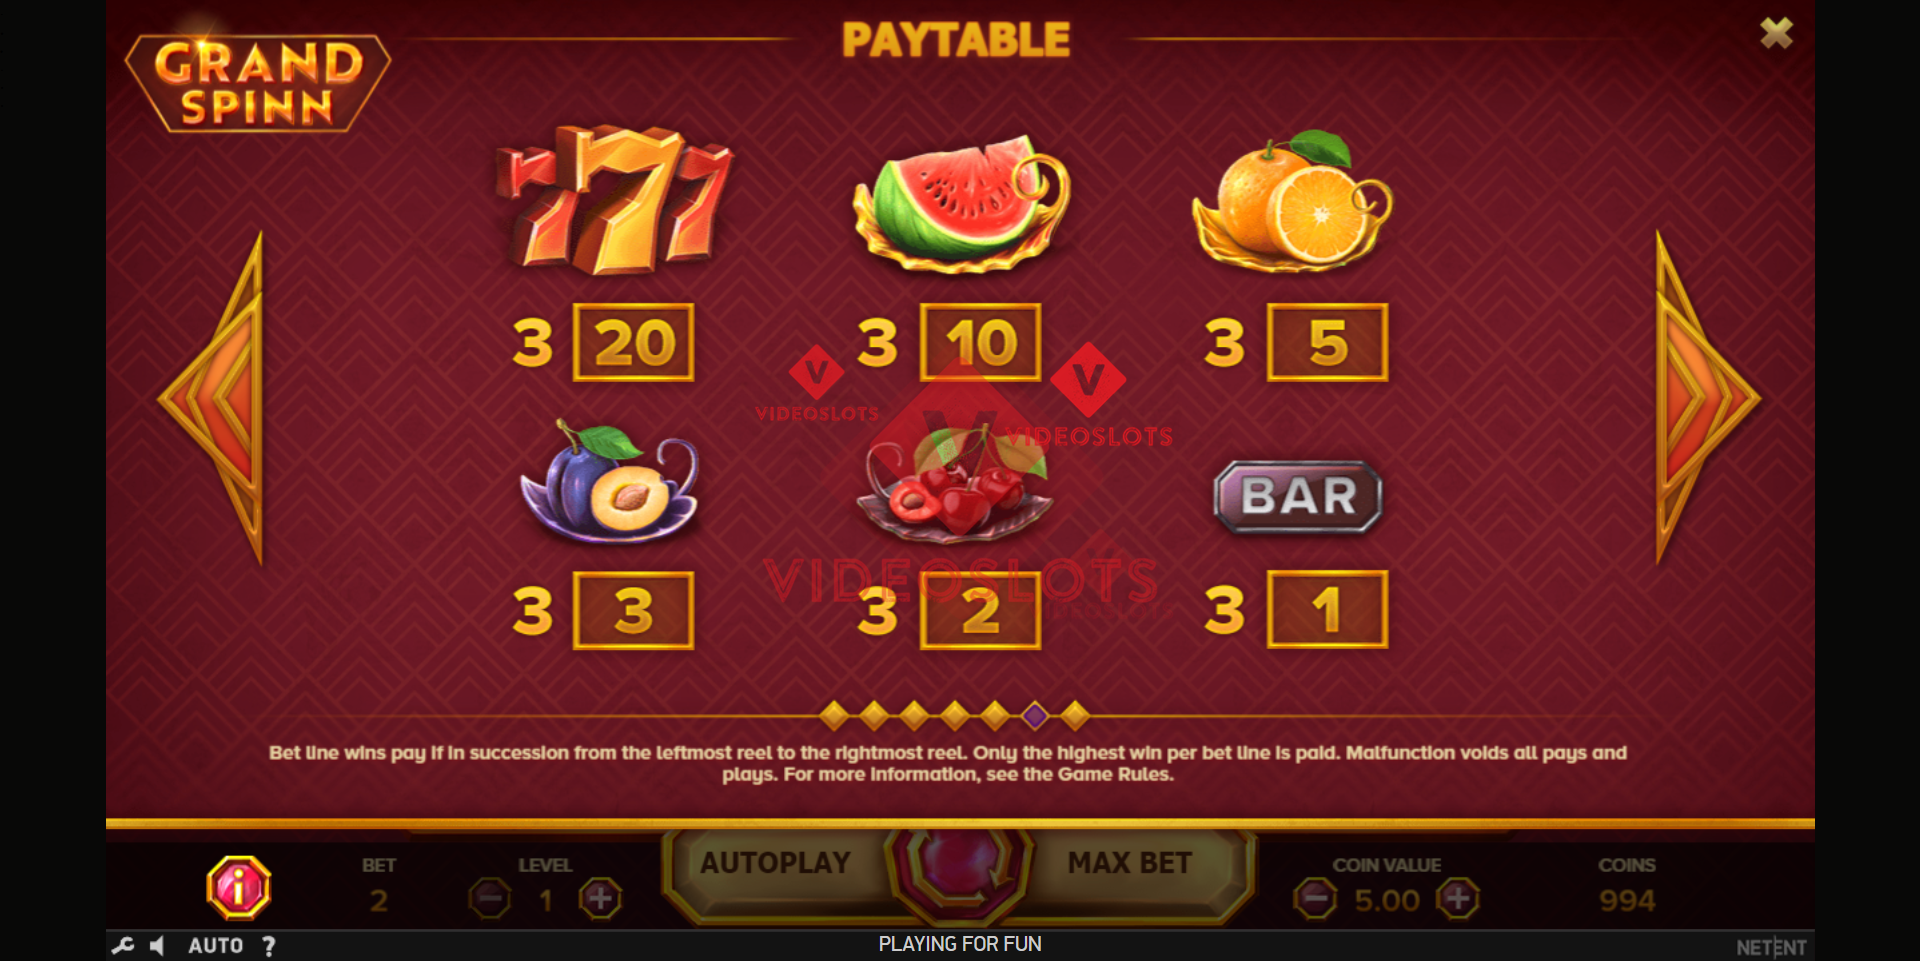 Pay Table for Grand Spinn slot from NetEnt